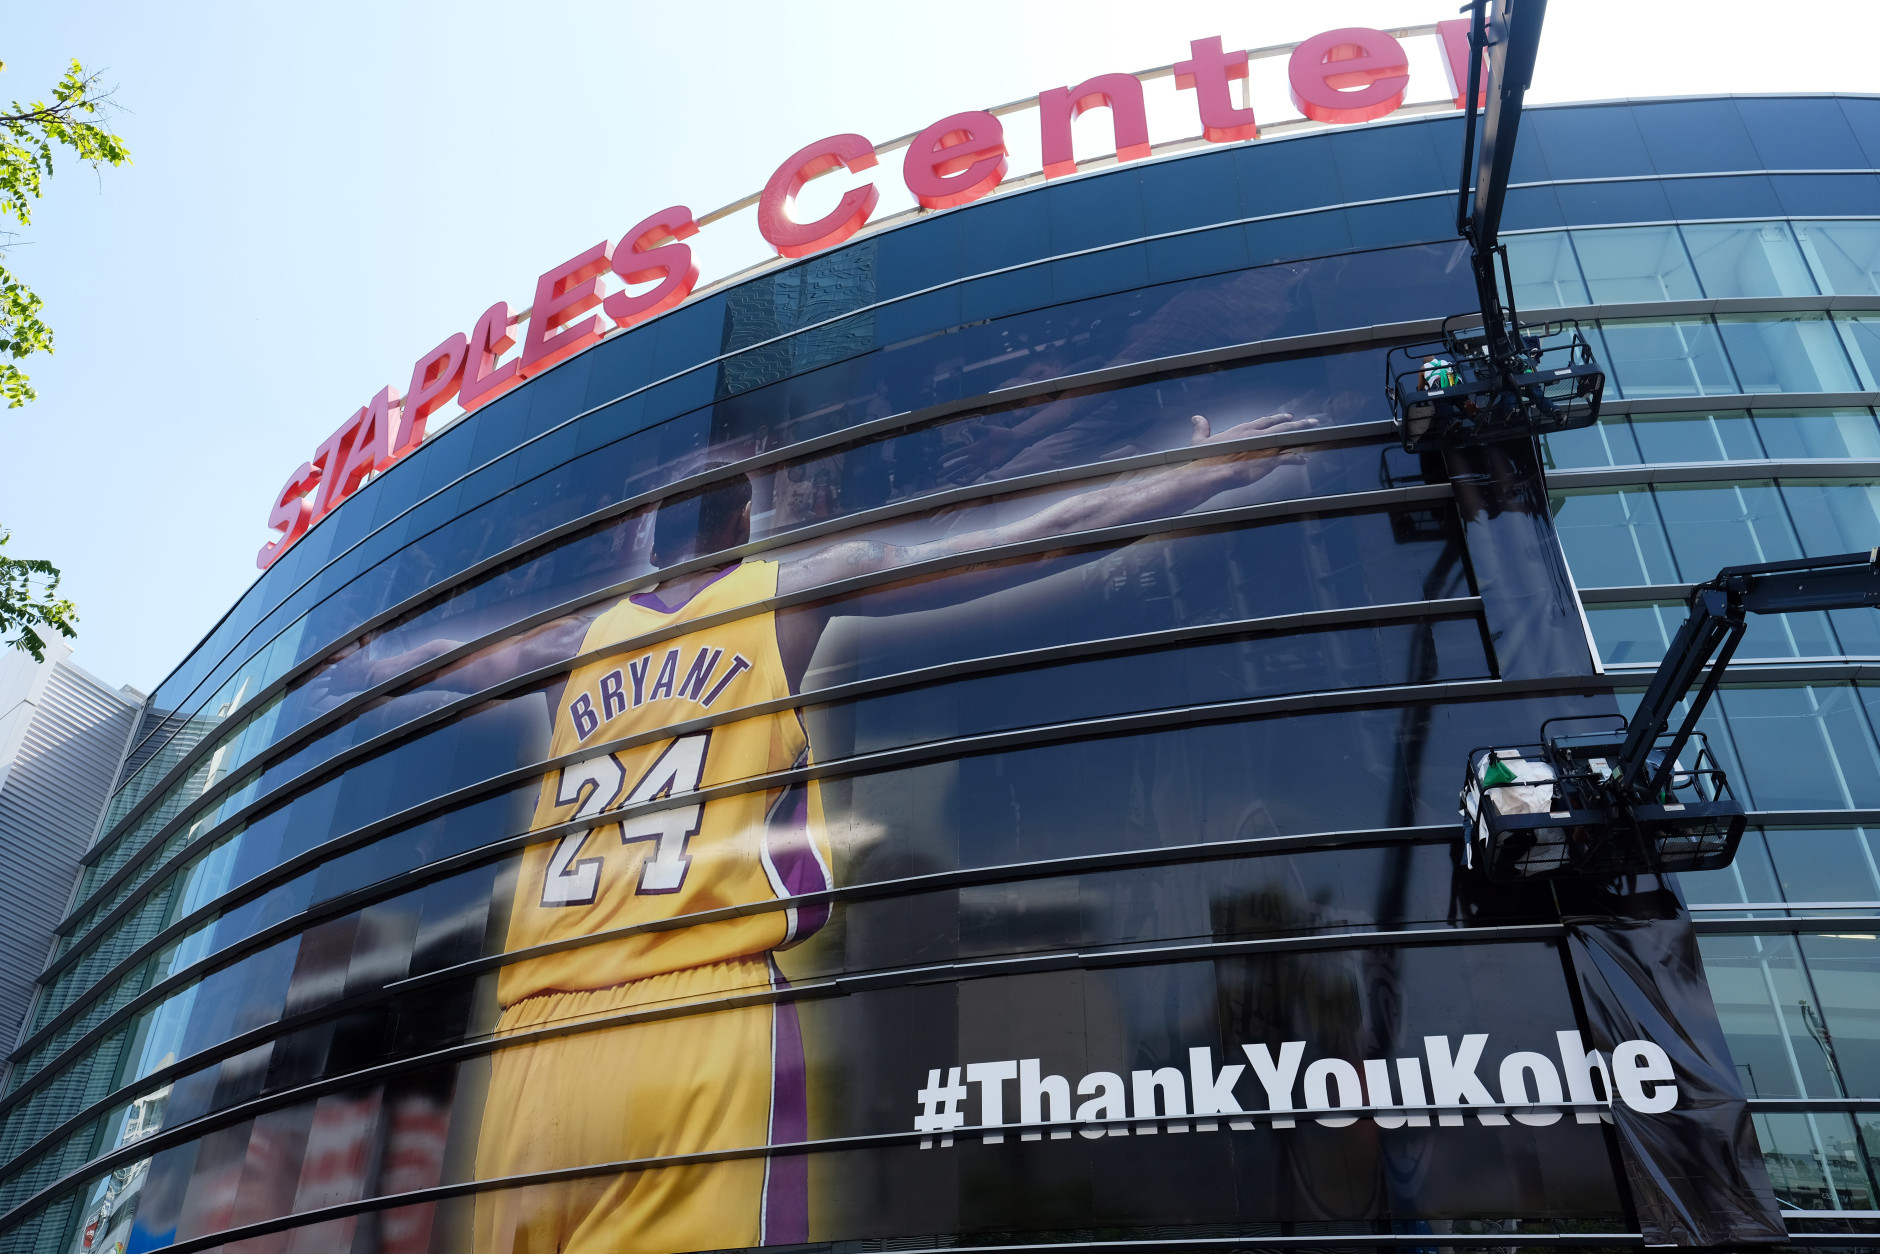 Workers wrap Staples Center in a giant banner congratulating Kobe Bryant before his last NBA basketball game, a contest against the Utah Jazz, in downtown Los Angeles Wednesday, April 13, 2016. Many of Bryant's fans - even some of the adults - have never known Los Angeles without him. I's a feeling they're about to have to get used to as fans celebrate his final night as a Laker. (AP Photo/Richard Vogel)